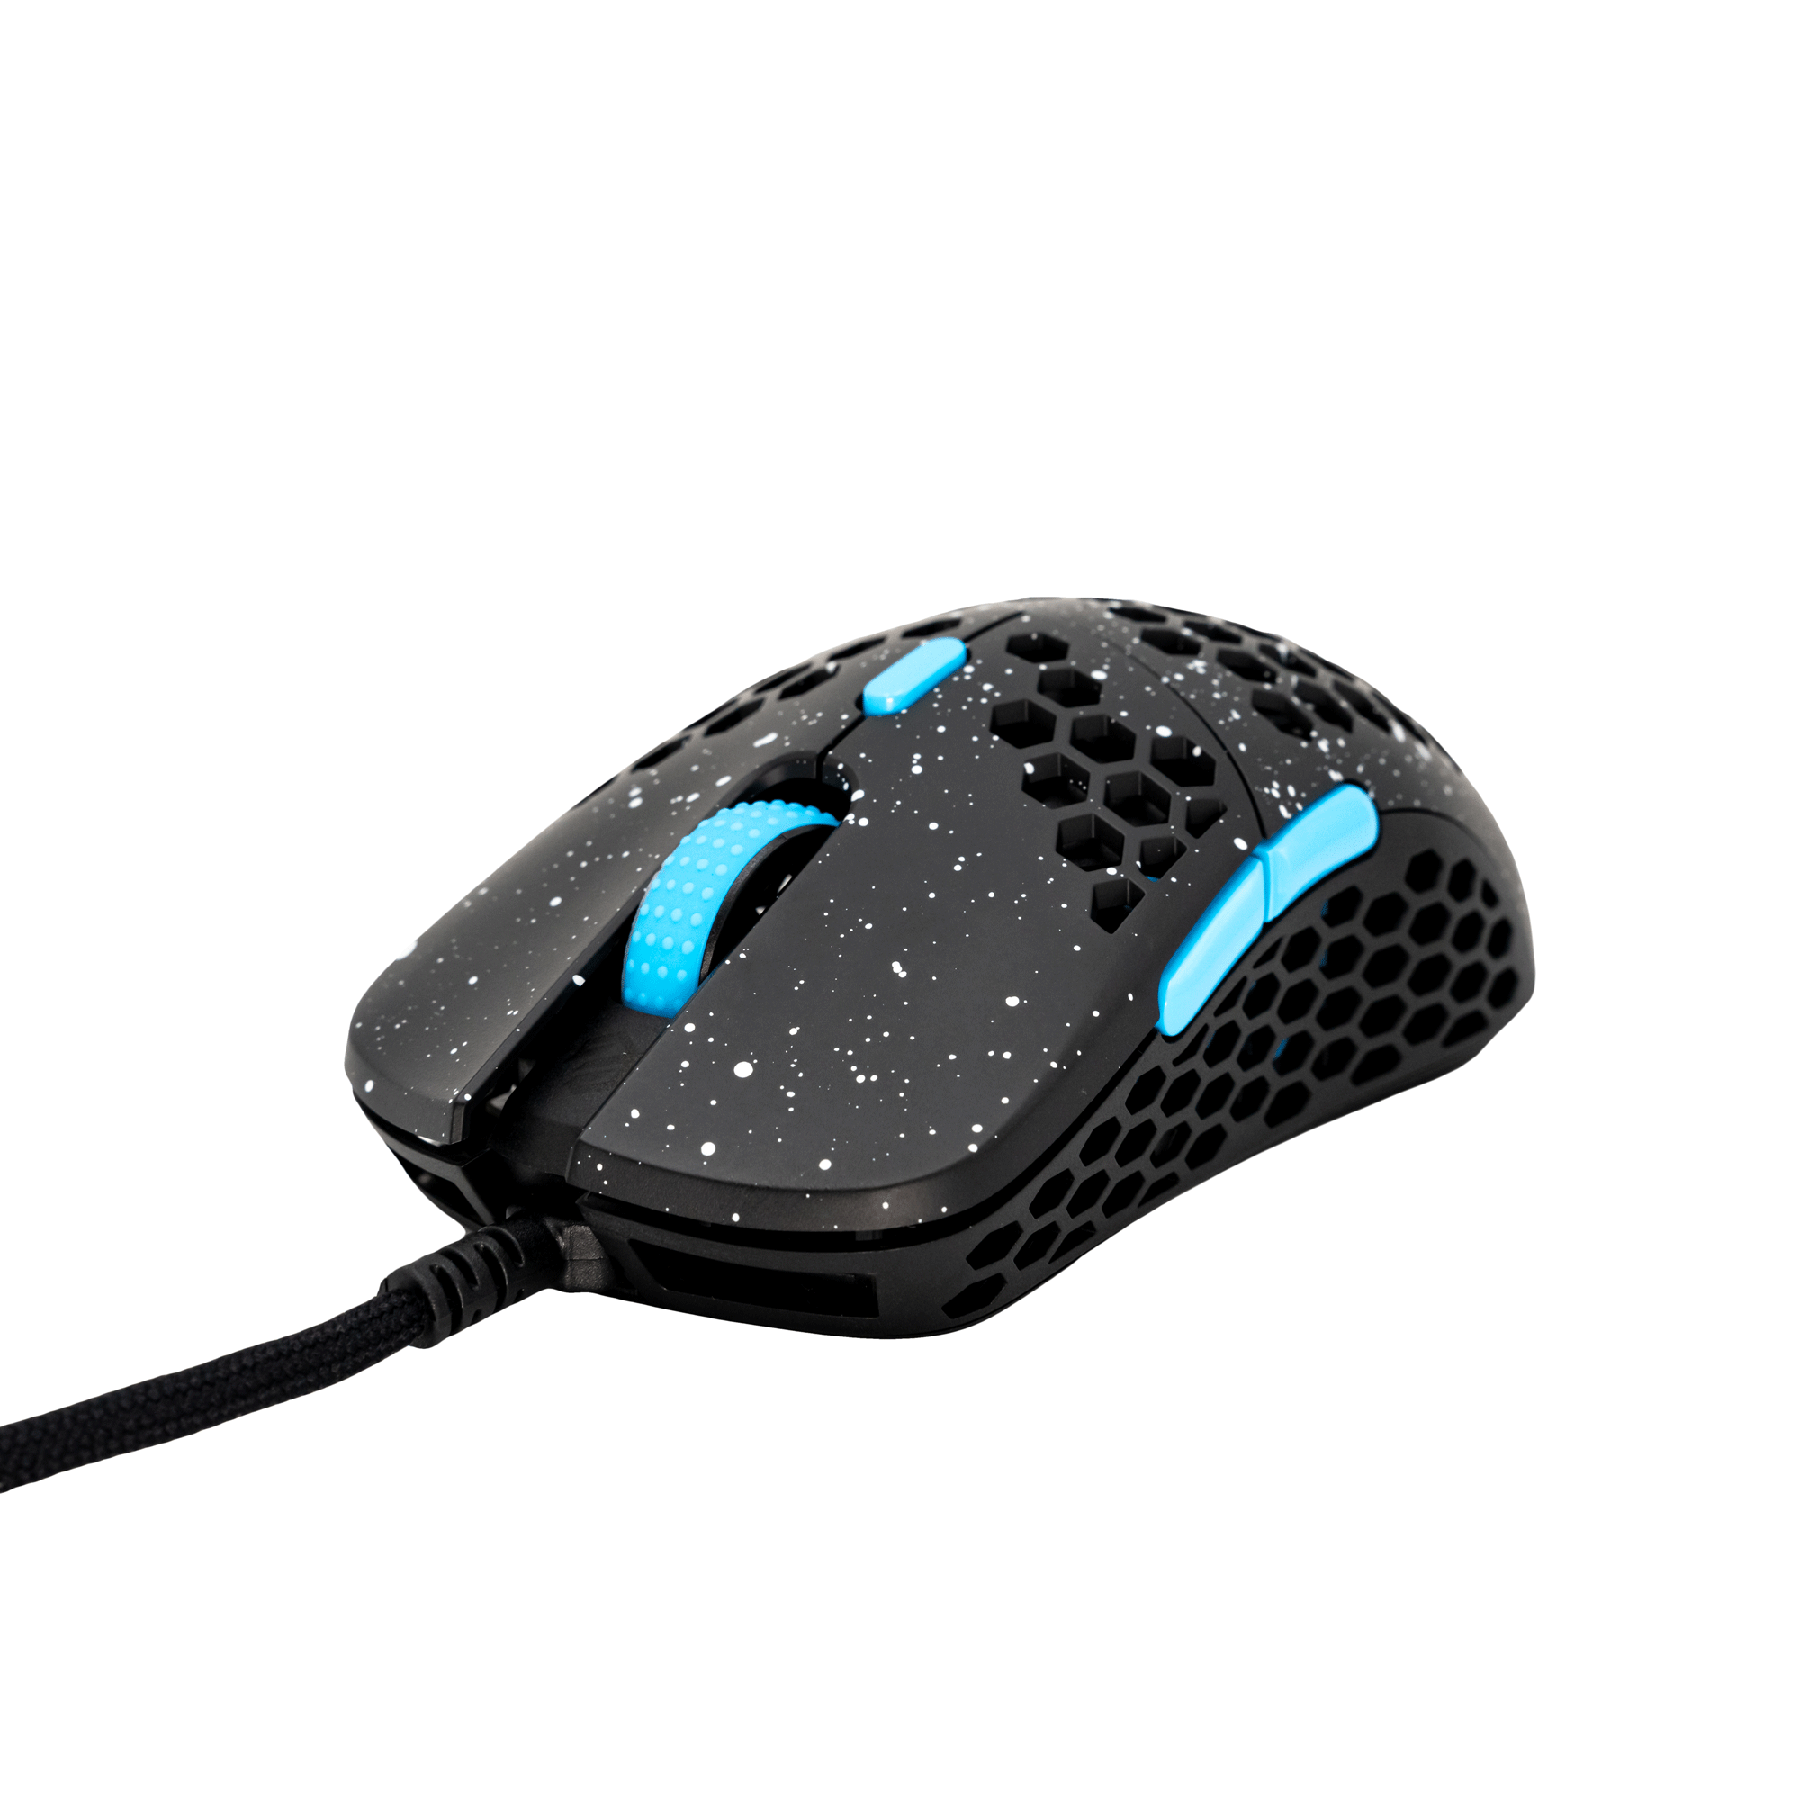 Hati-S HTS ACE Wired Gaming Mouse up to 16000 DPI - 3389 